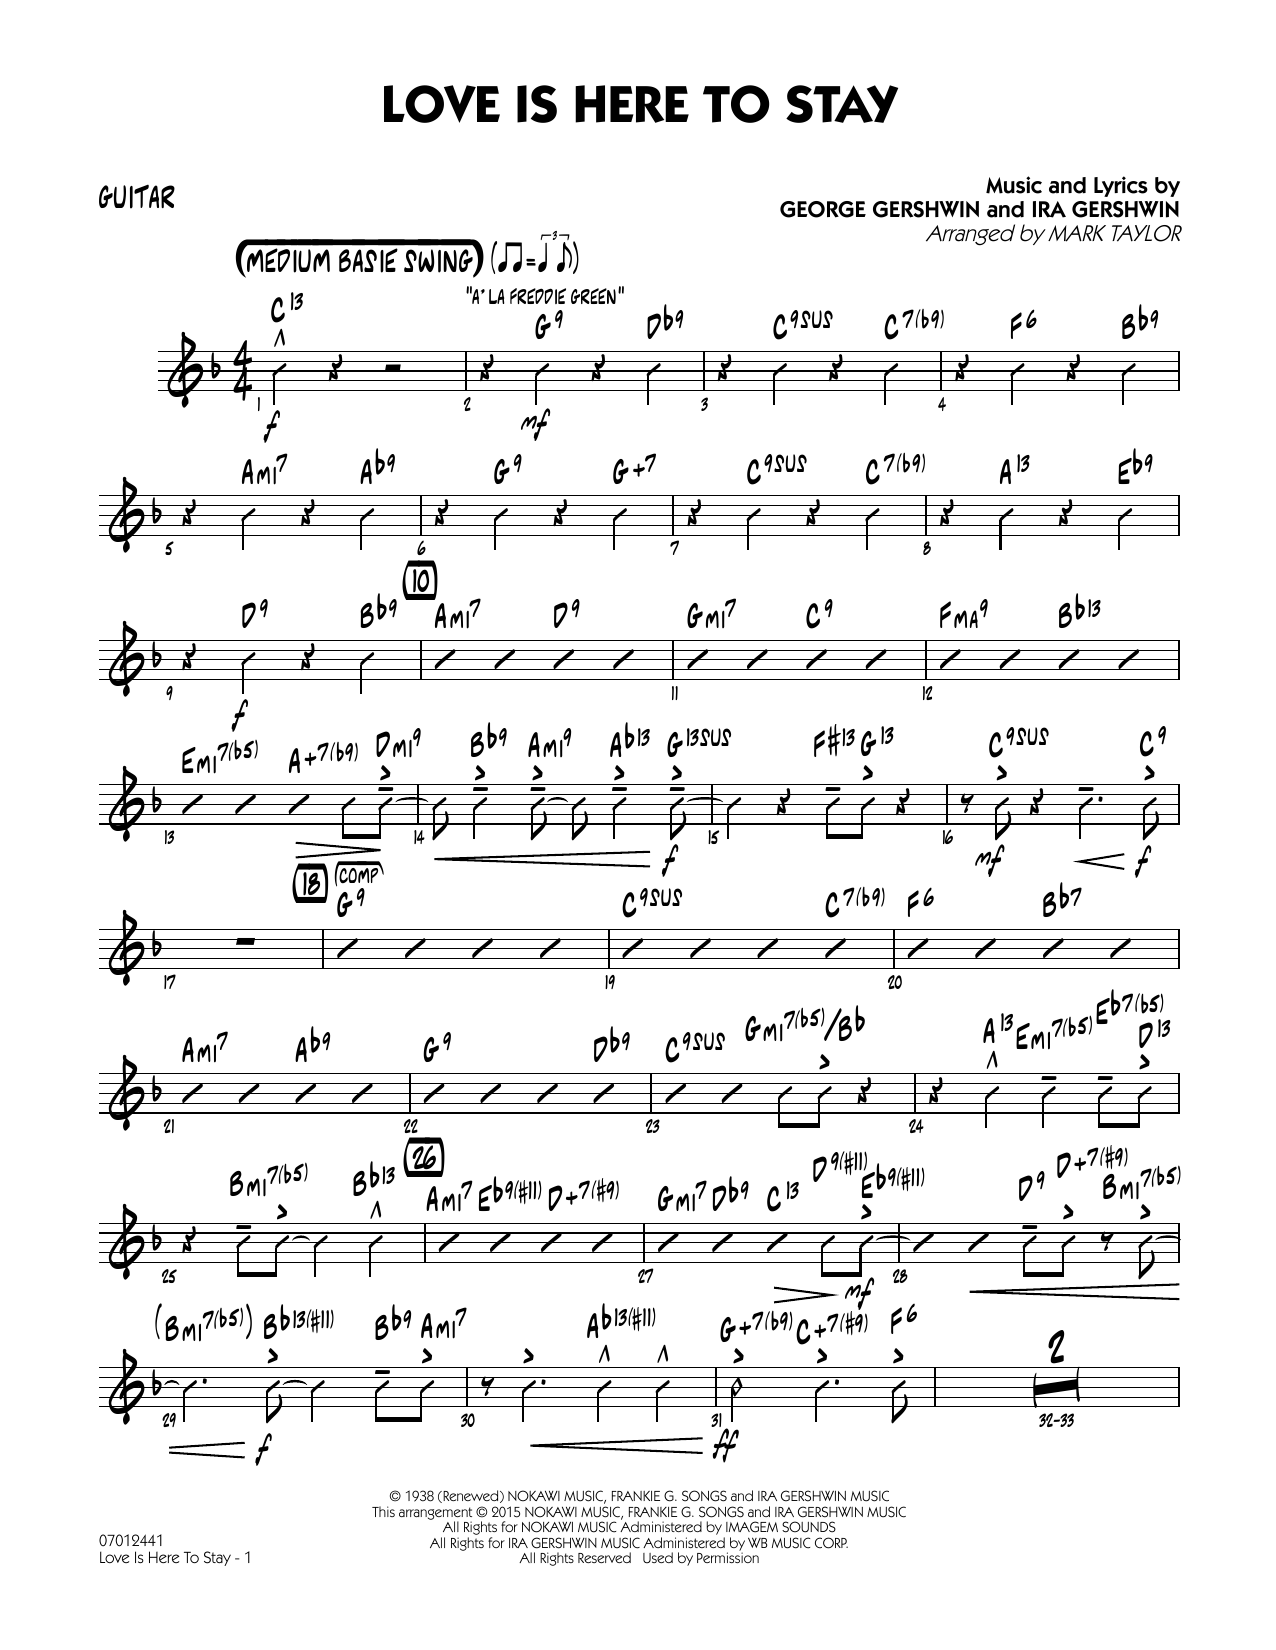 Mark Taylor Love Is Here to Stay - Guitar sheet music notes and chords. Download Printable PDF.